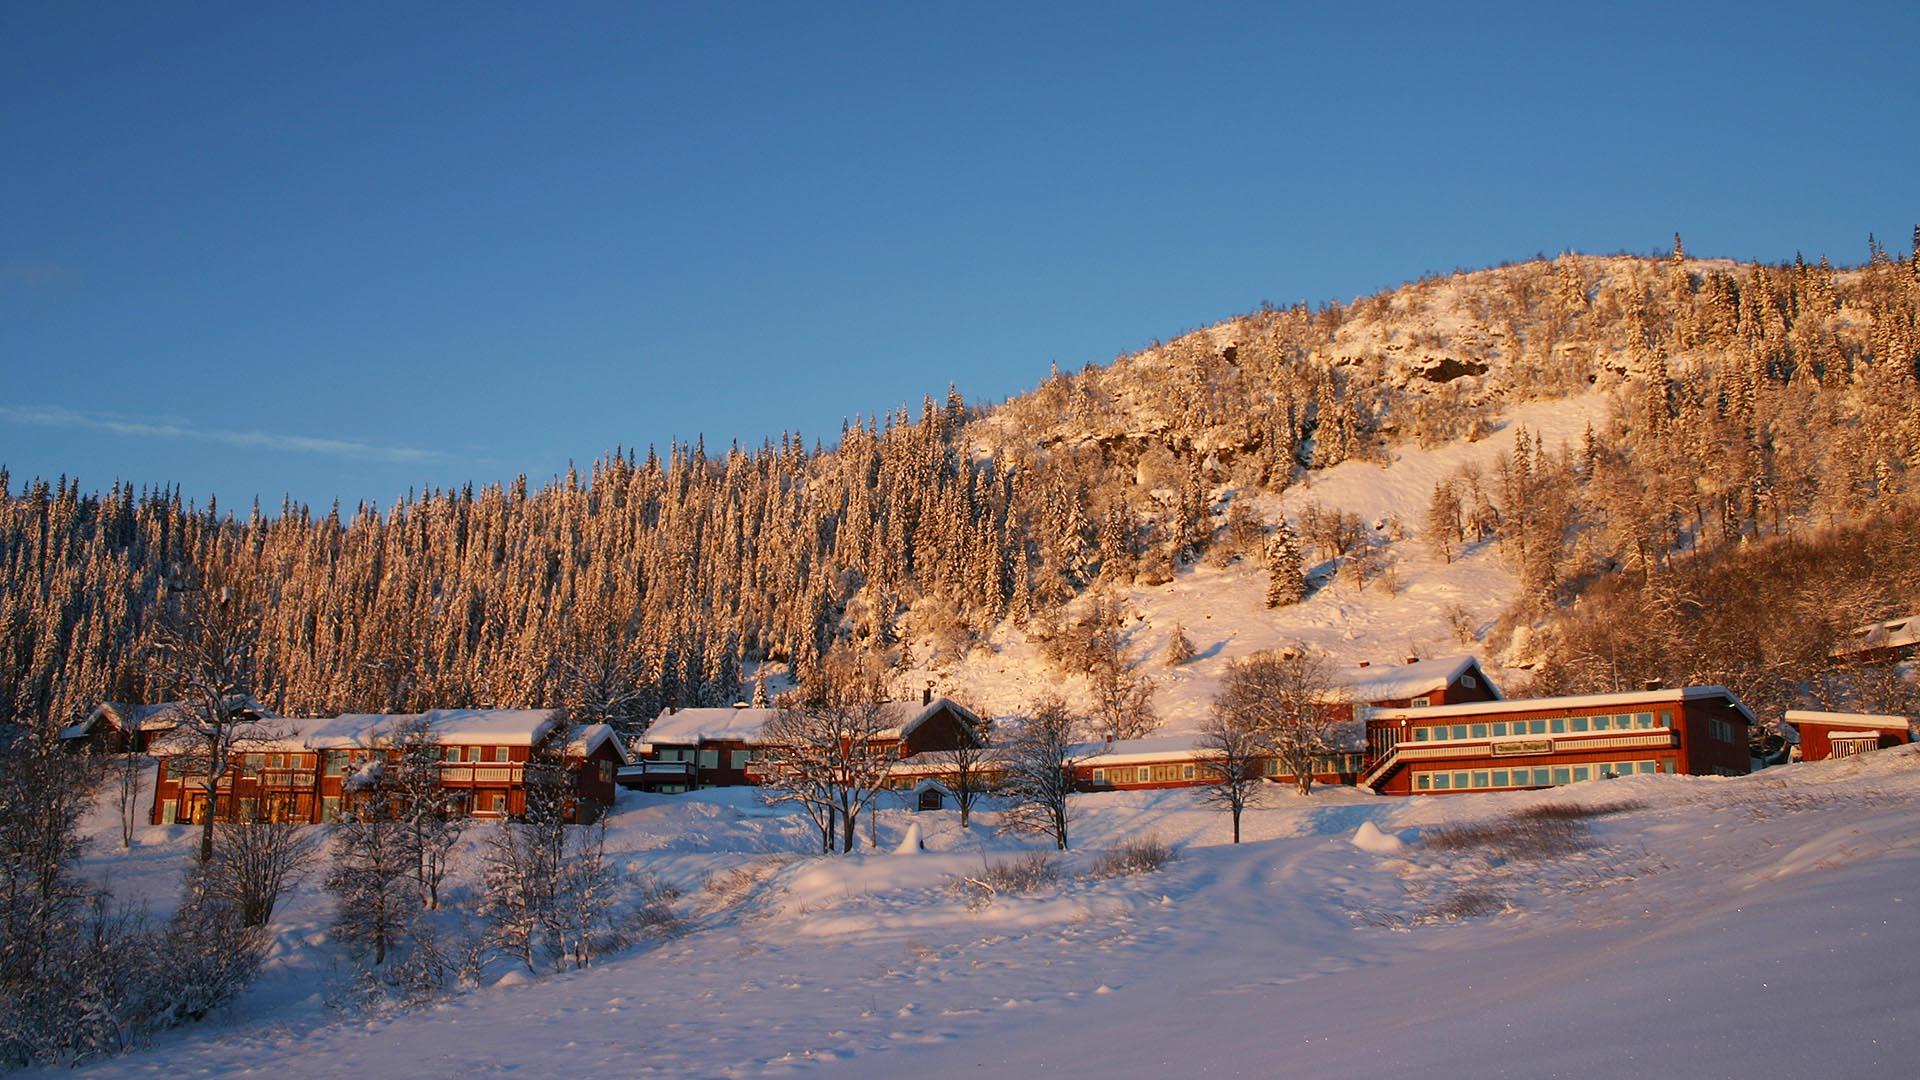 Long, lowrise red wooden buildings at the foot of a hill ina clearing of spruce forest in low winter sun. Snow covers the ground and the trees.